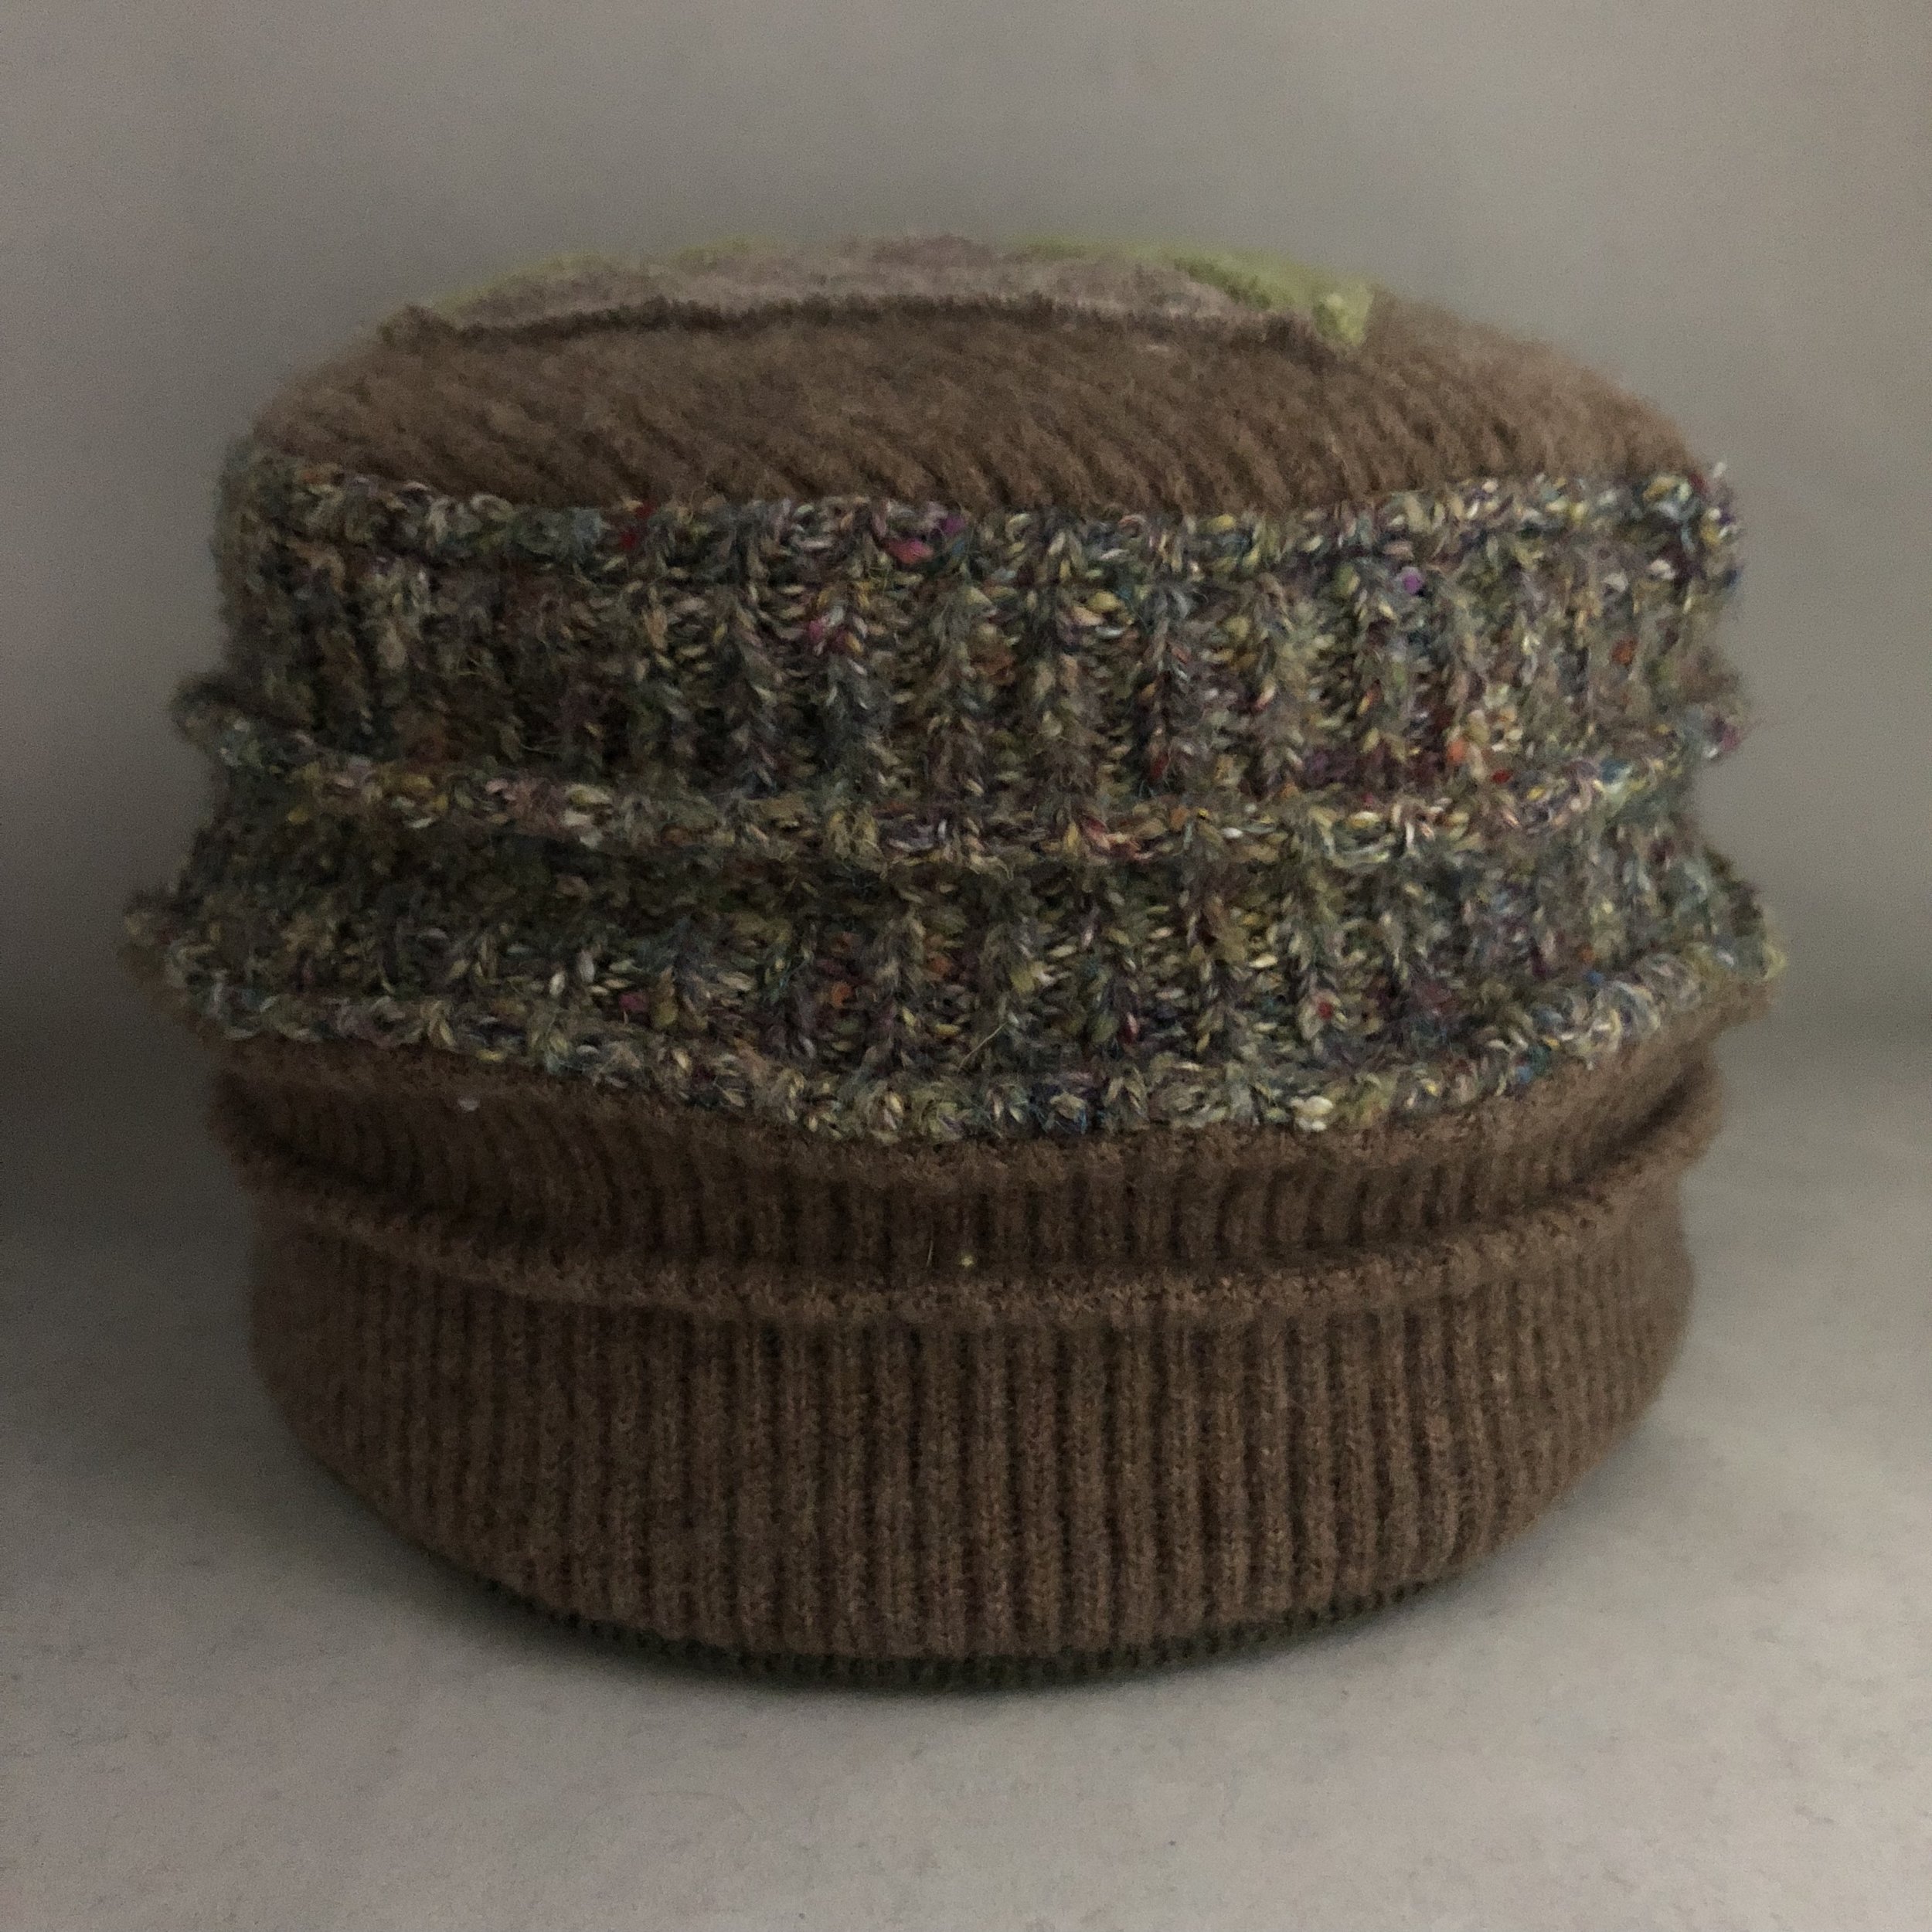 Tuque Design: Cotton Band/Wool Body — Sweater Heads